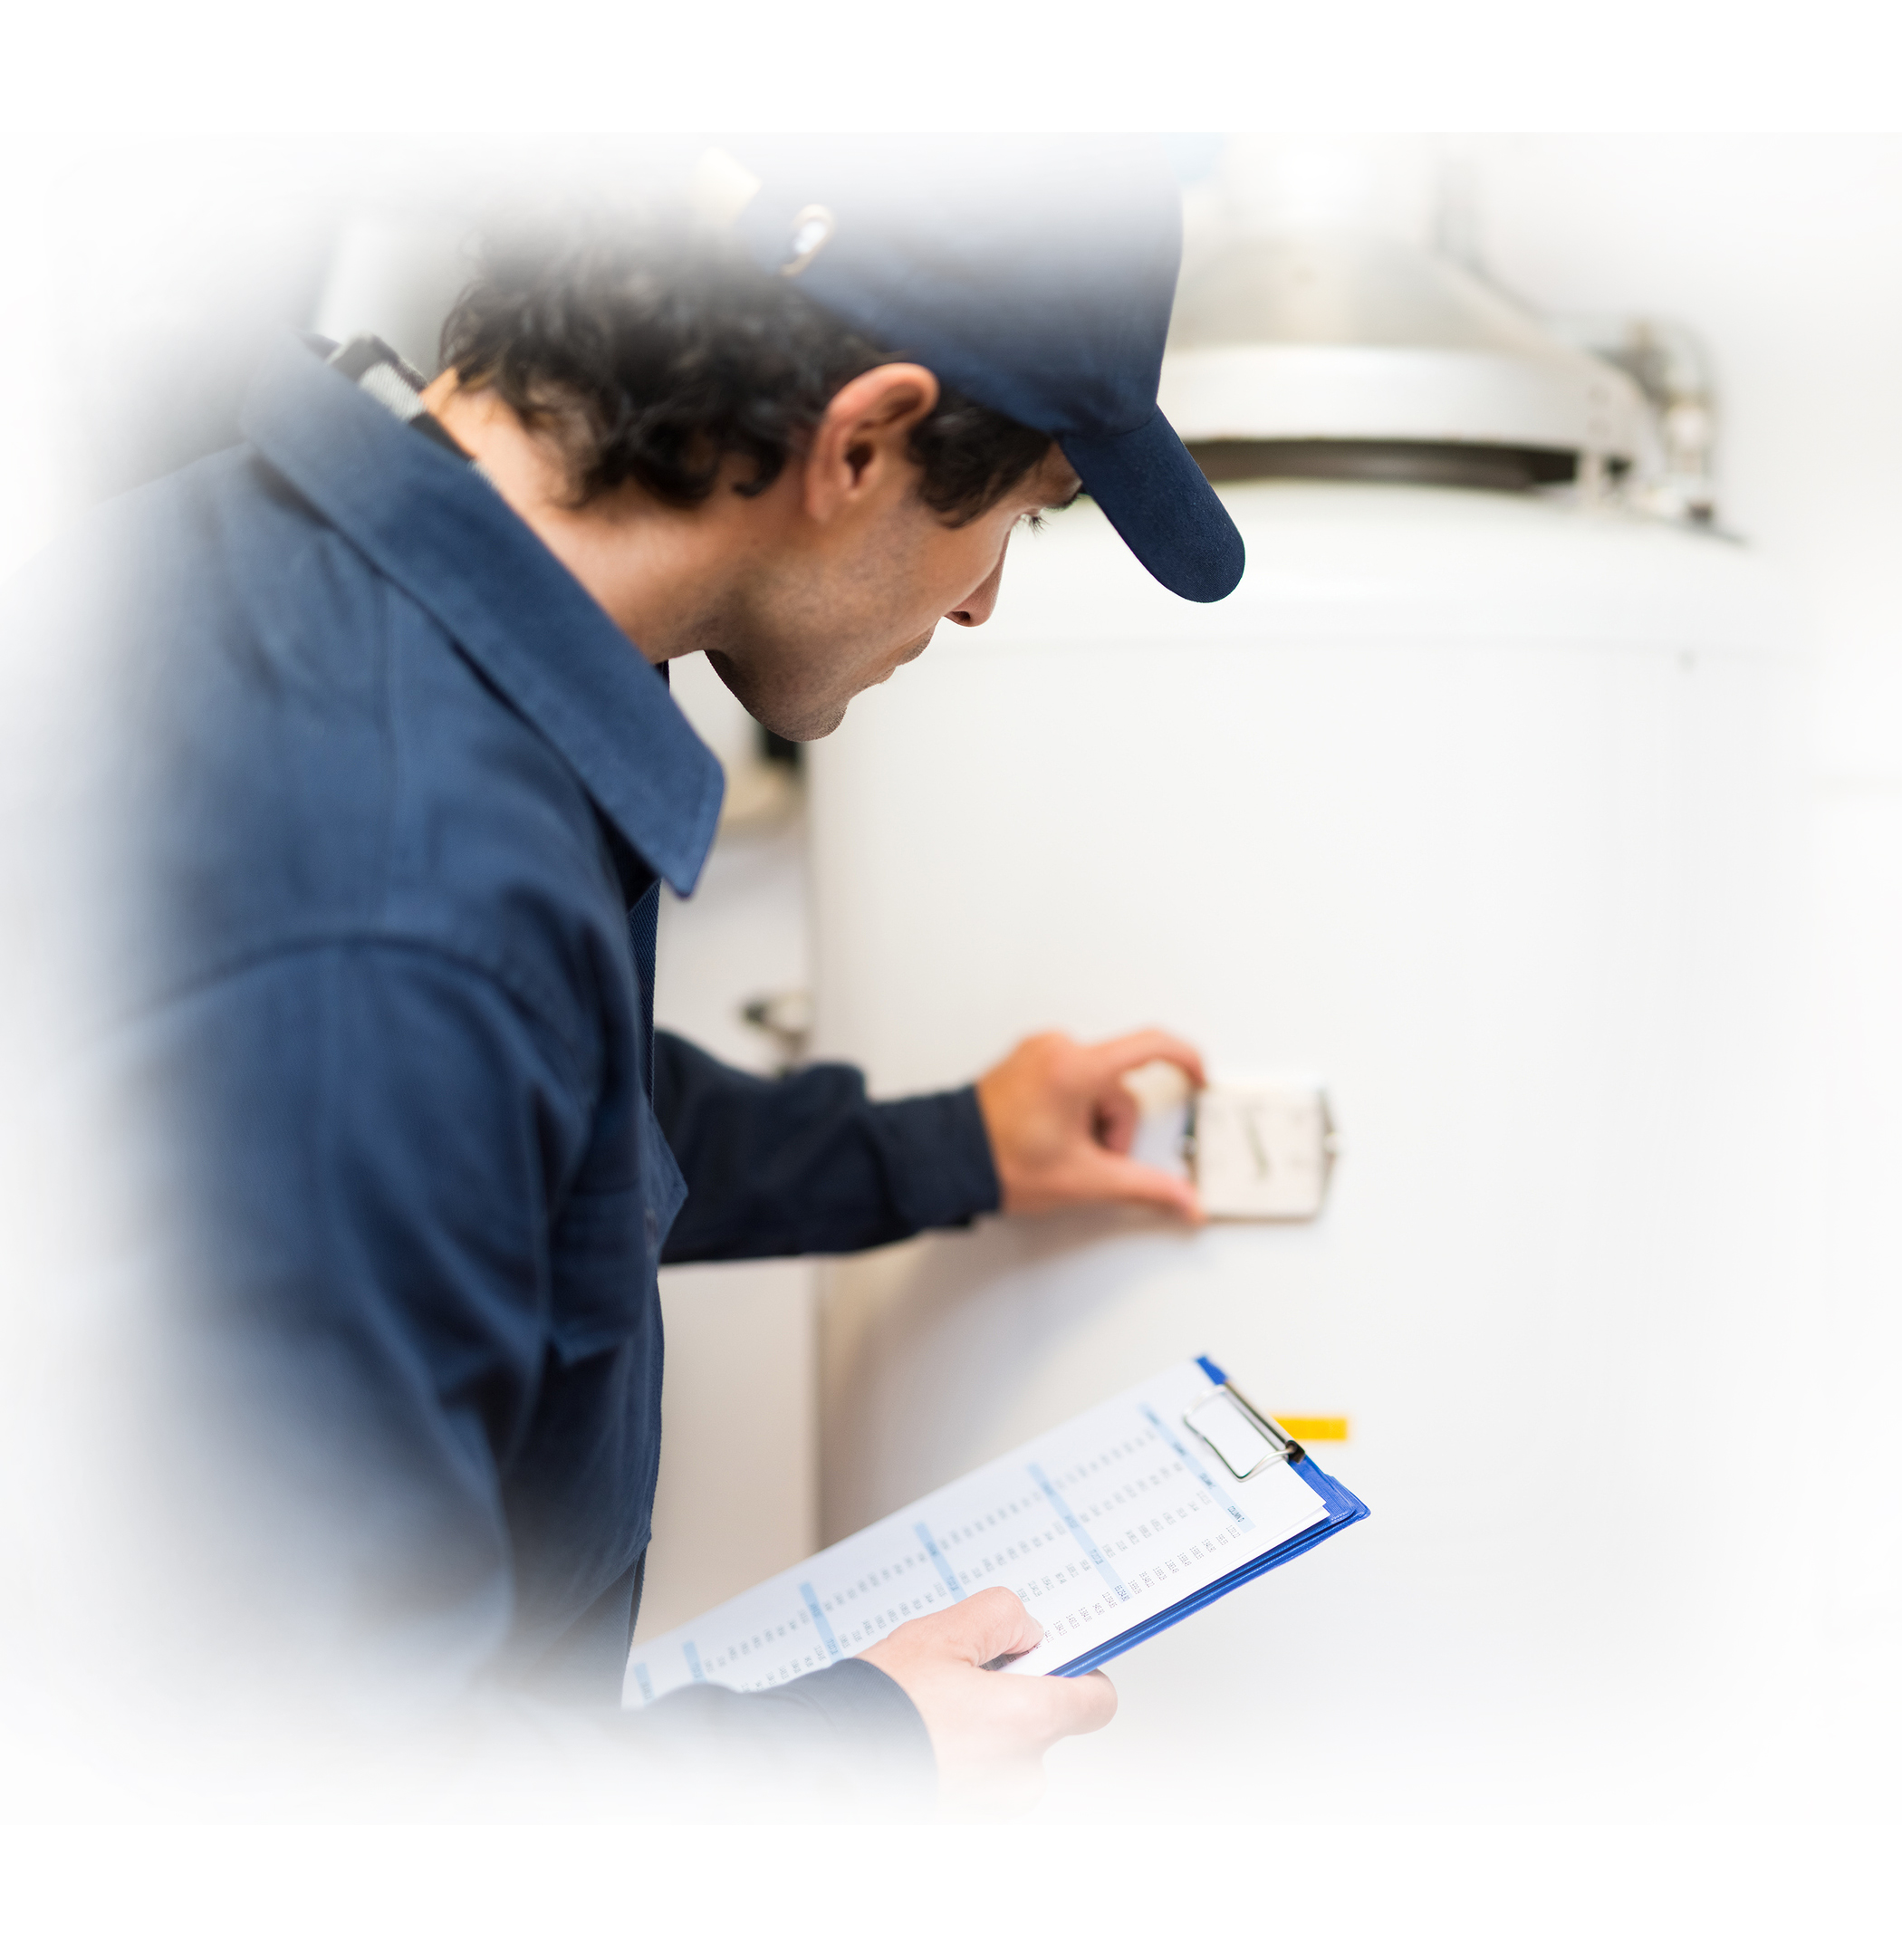 water heater installation and repair